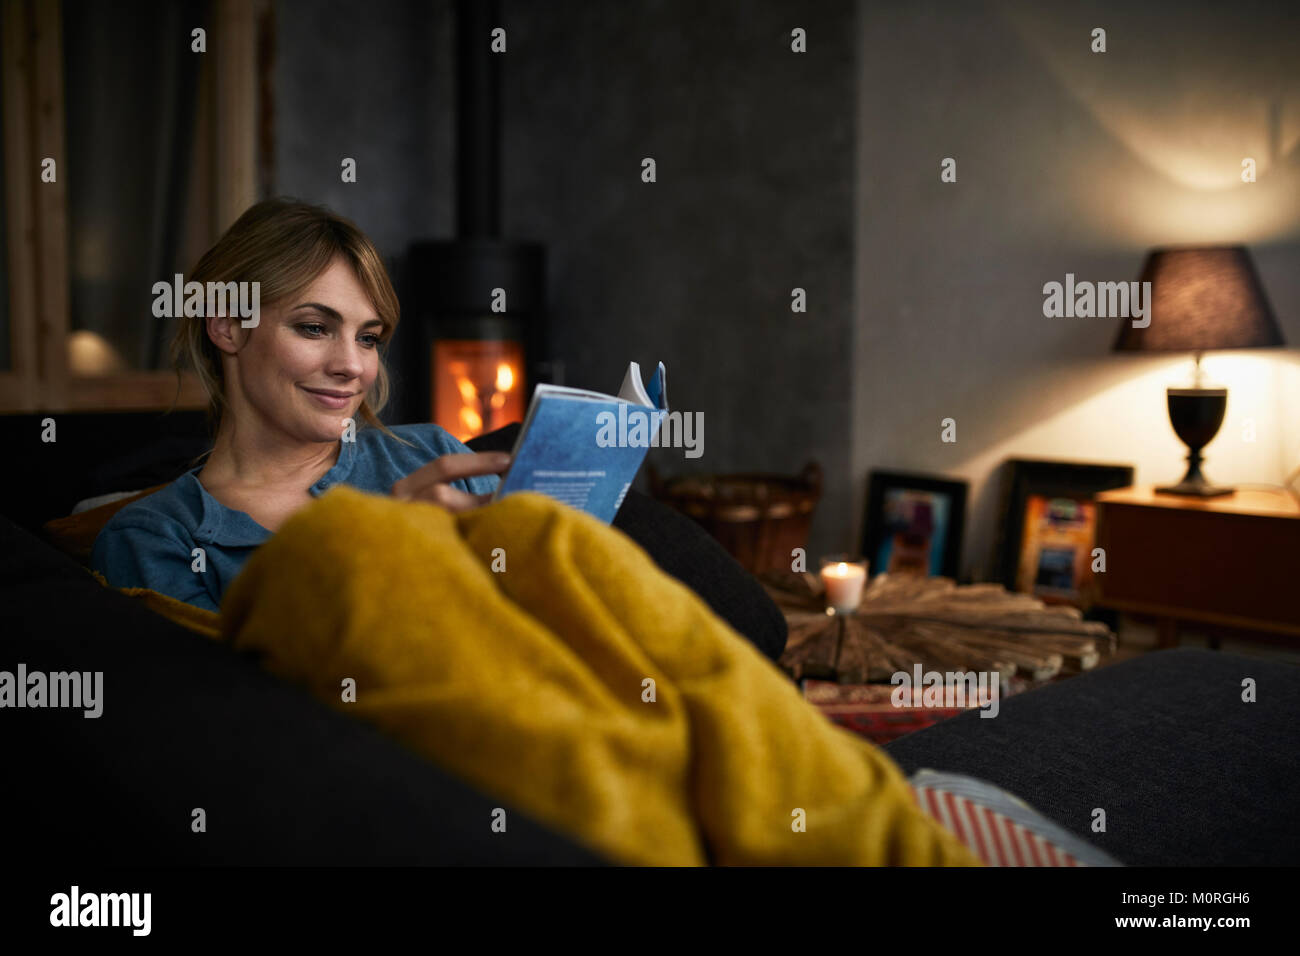 Portrait of smiling woman reading a book on couch at home in the evening Stock Photo